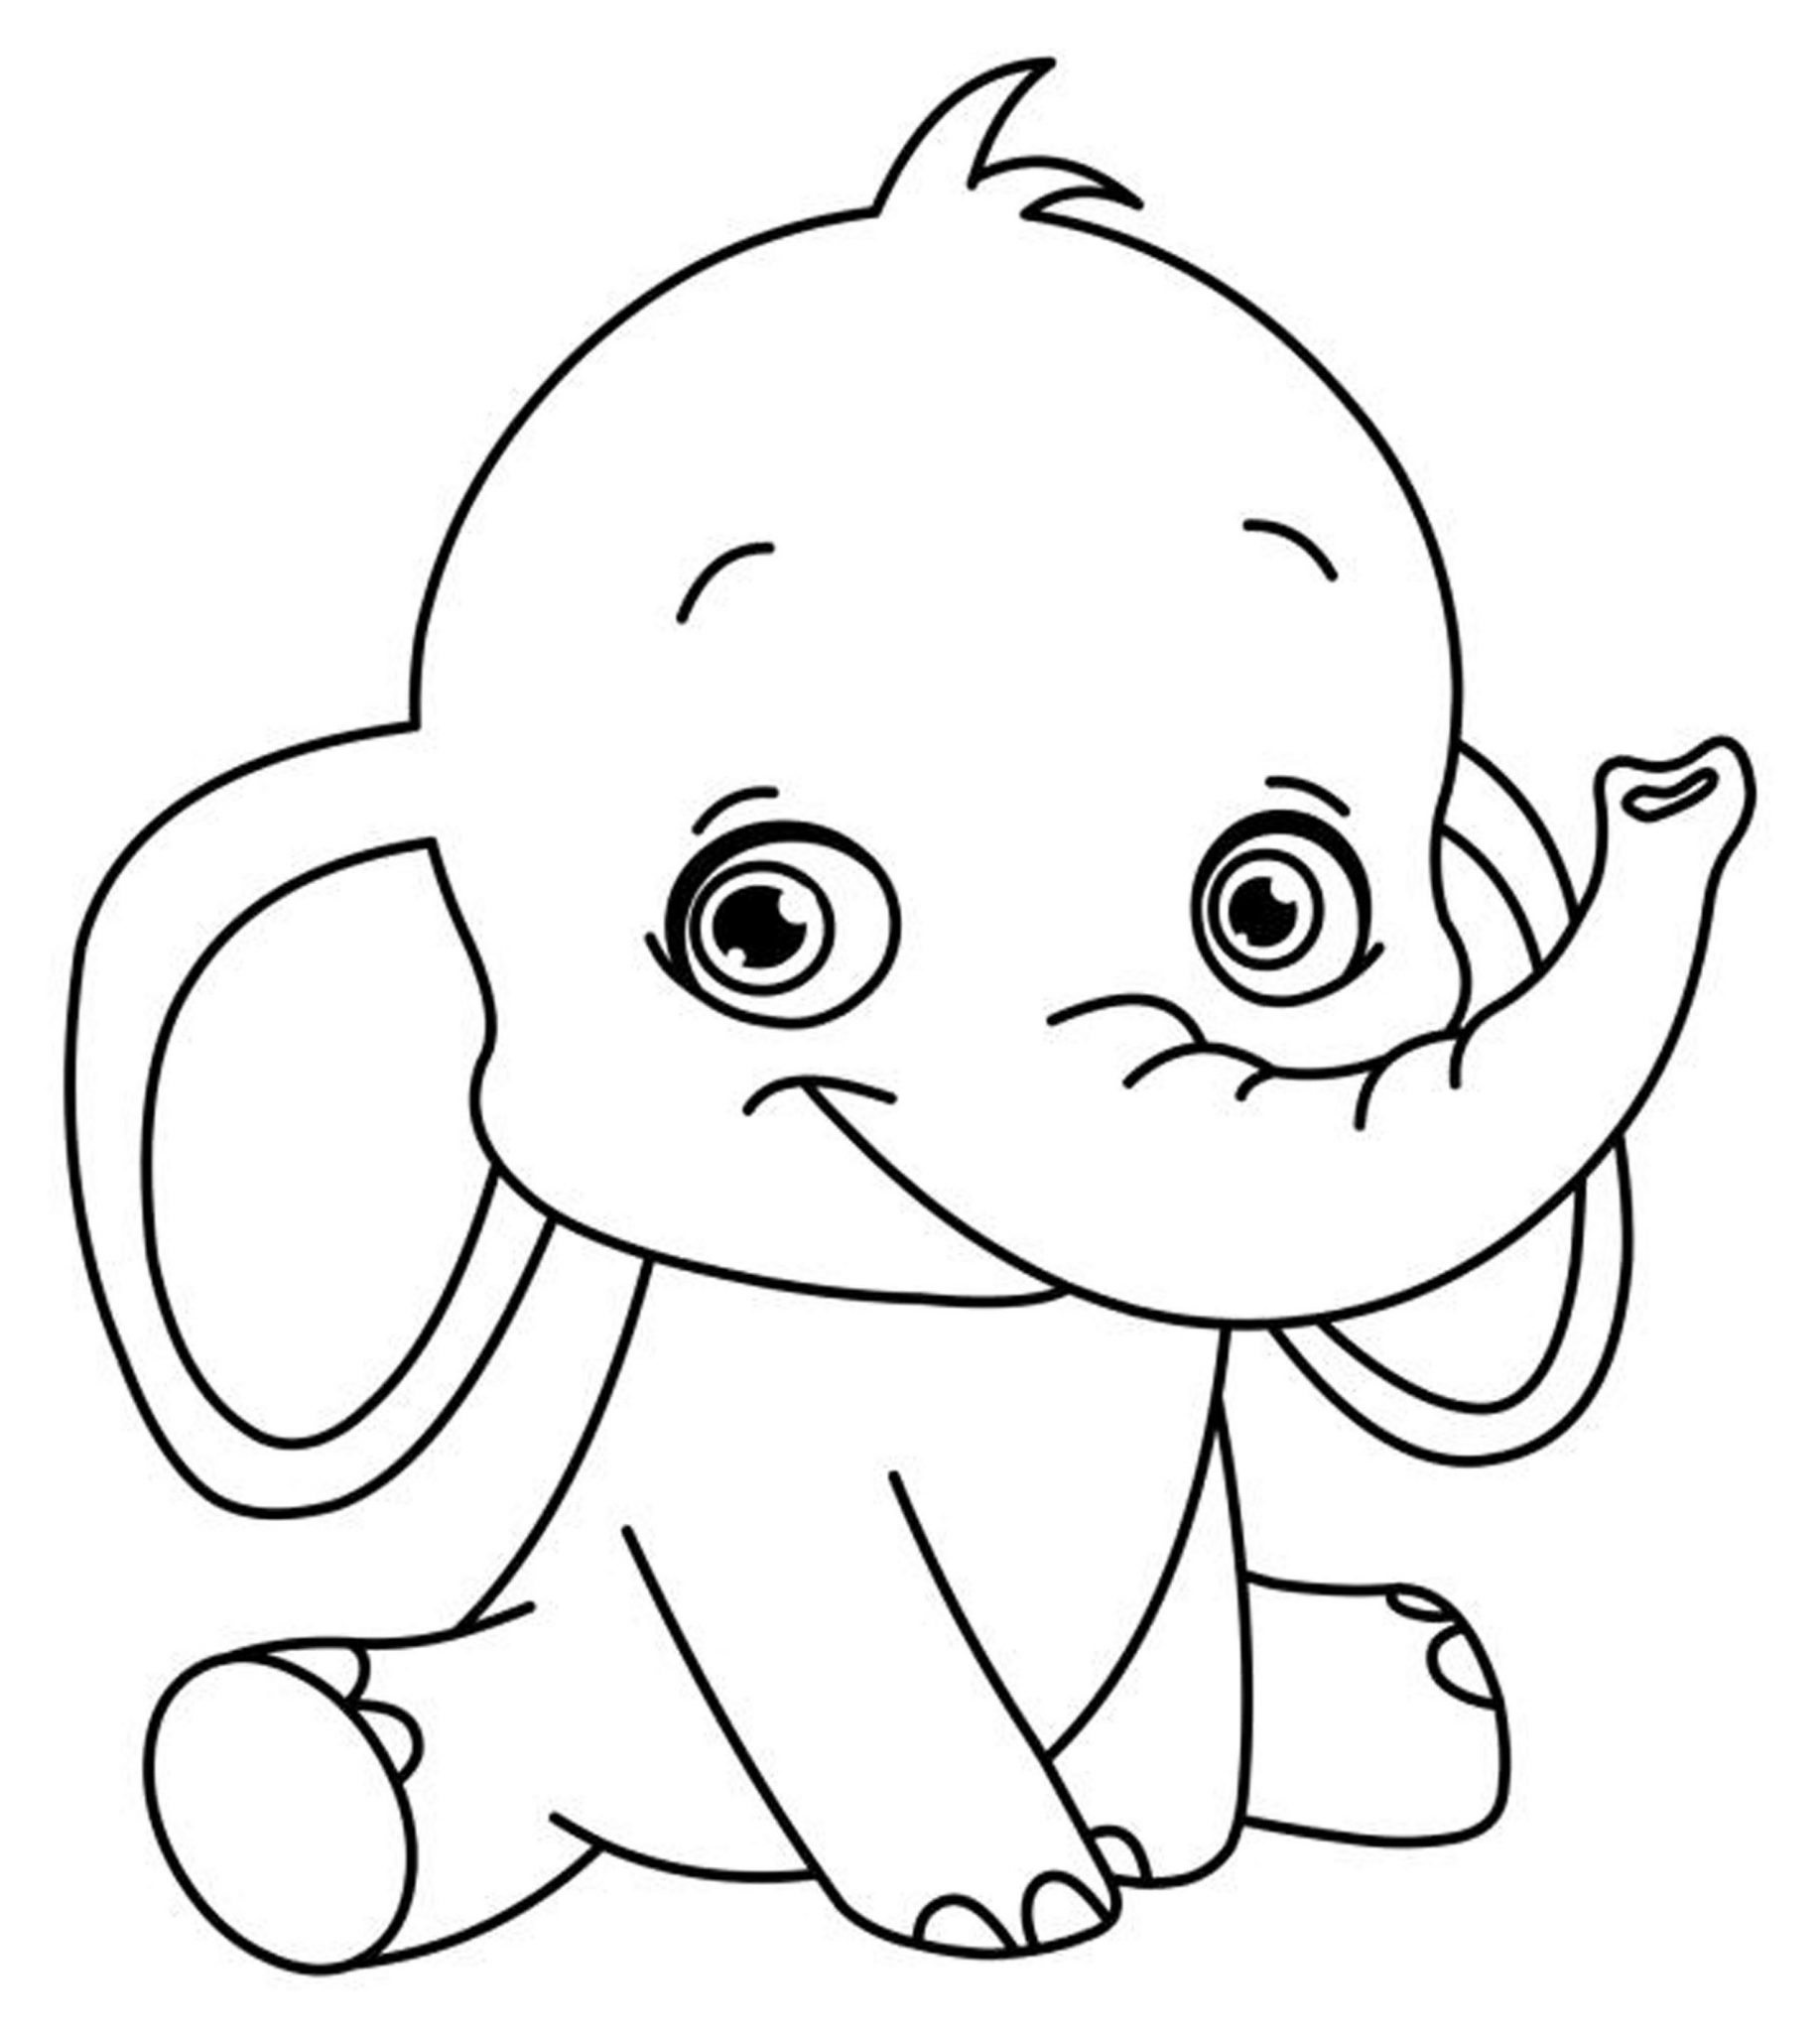 33 Free Disney Coloring Pages For Kids BAPS